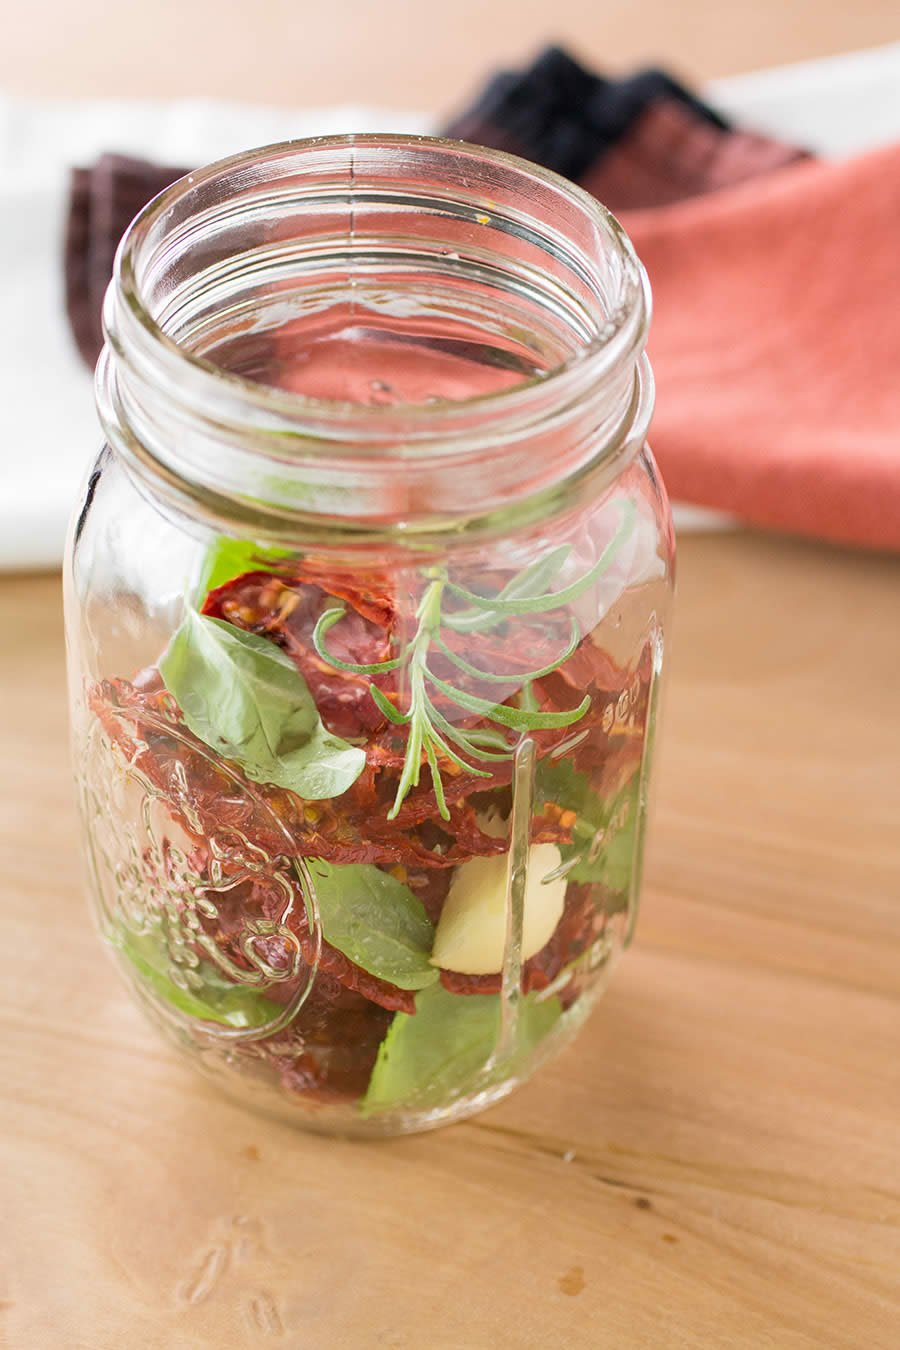 How to Make Sun Dried Tomatoes - with a Dehydrator